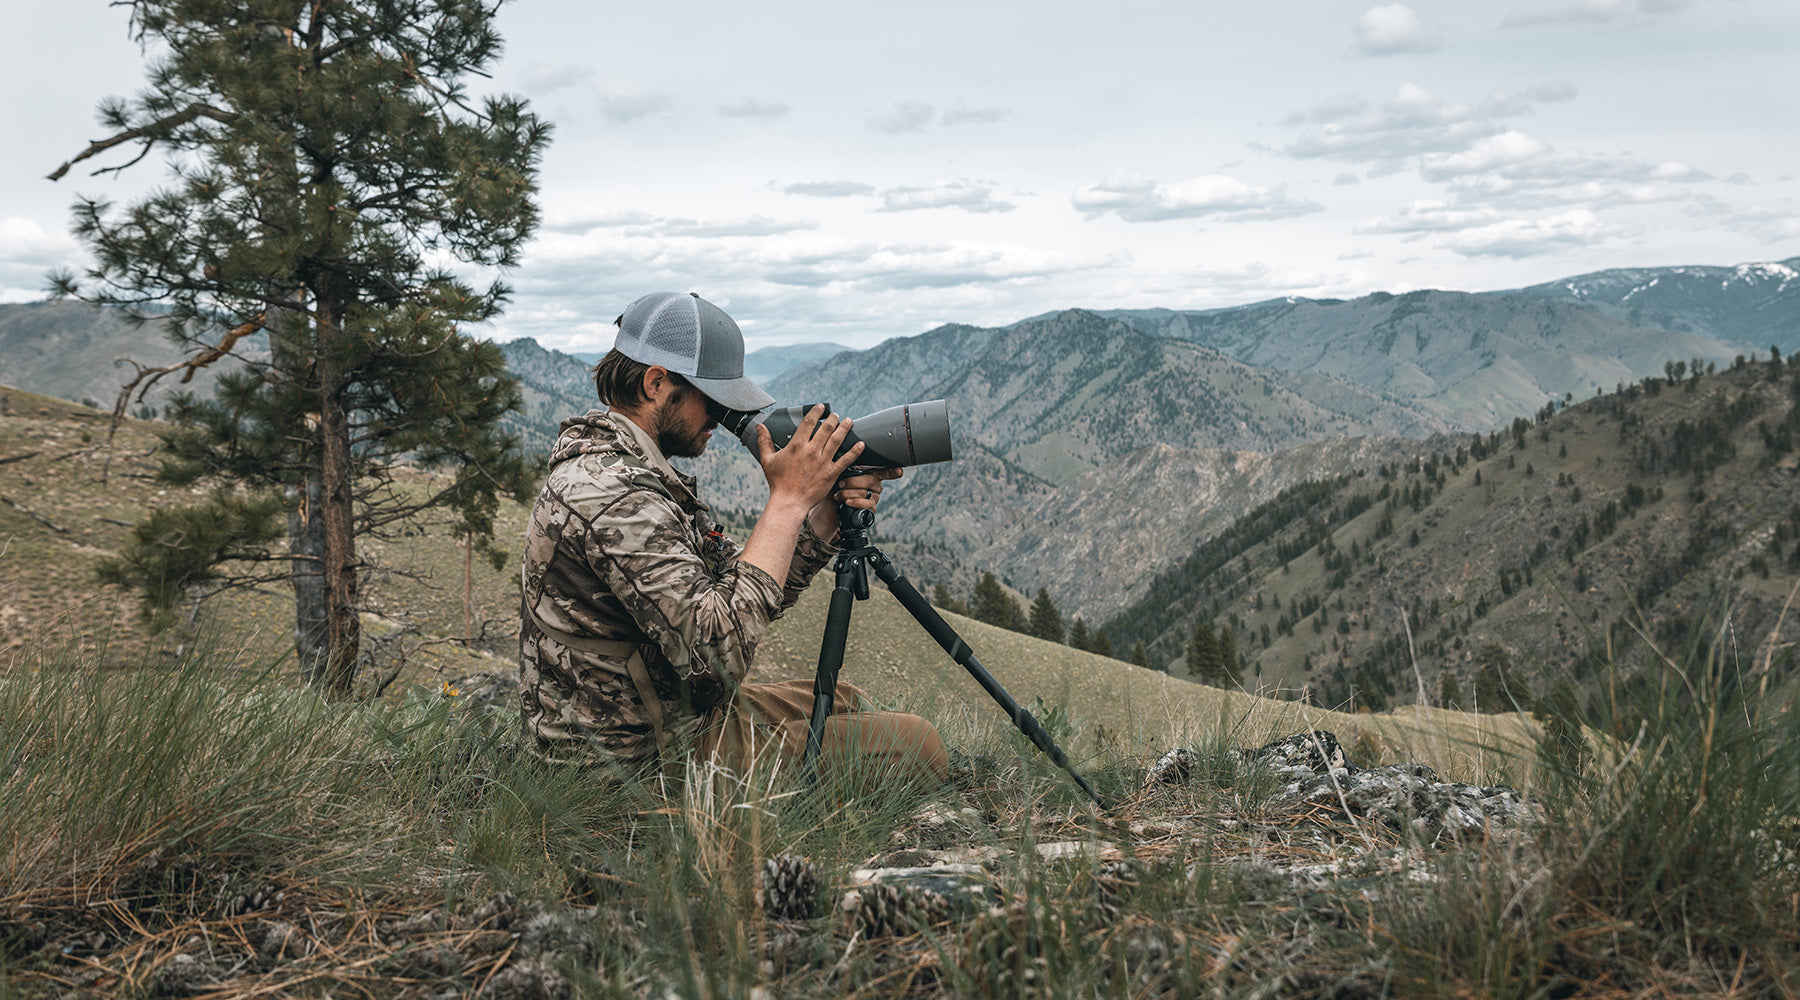 The Swiss Army Knife of Bear Hunting: Why Tripods Are a Must-Have Tool